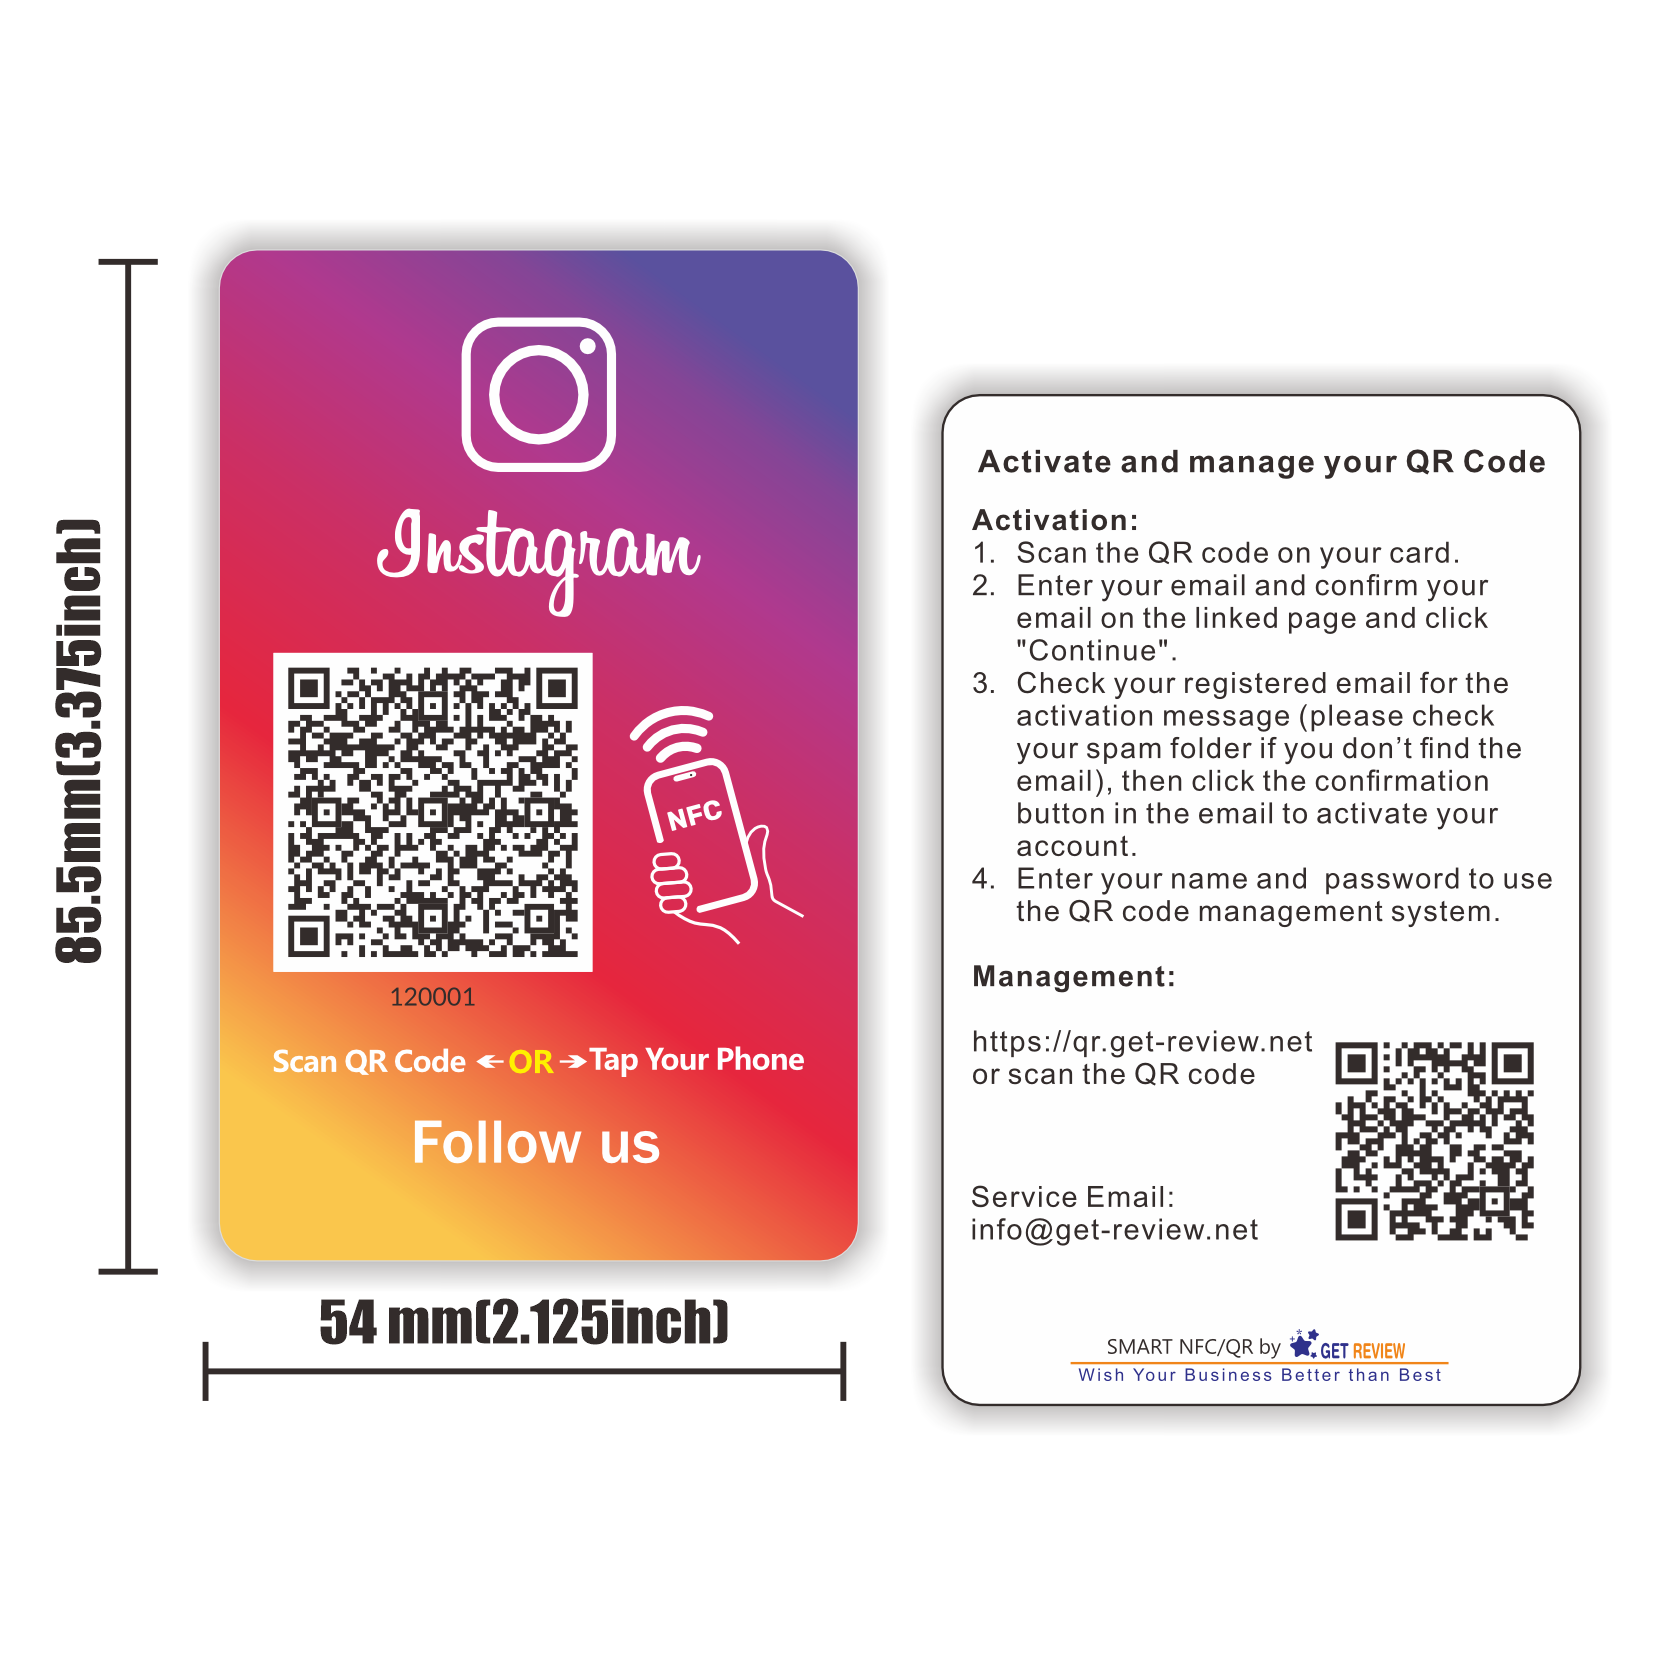 Contactless Sharing Smart NFC 'Follow Us On Instagram' Card Touchless Reusable QR Code Tap Review Card